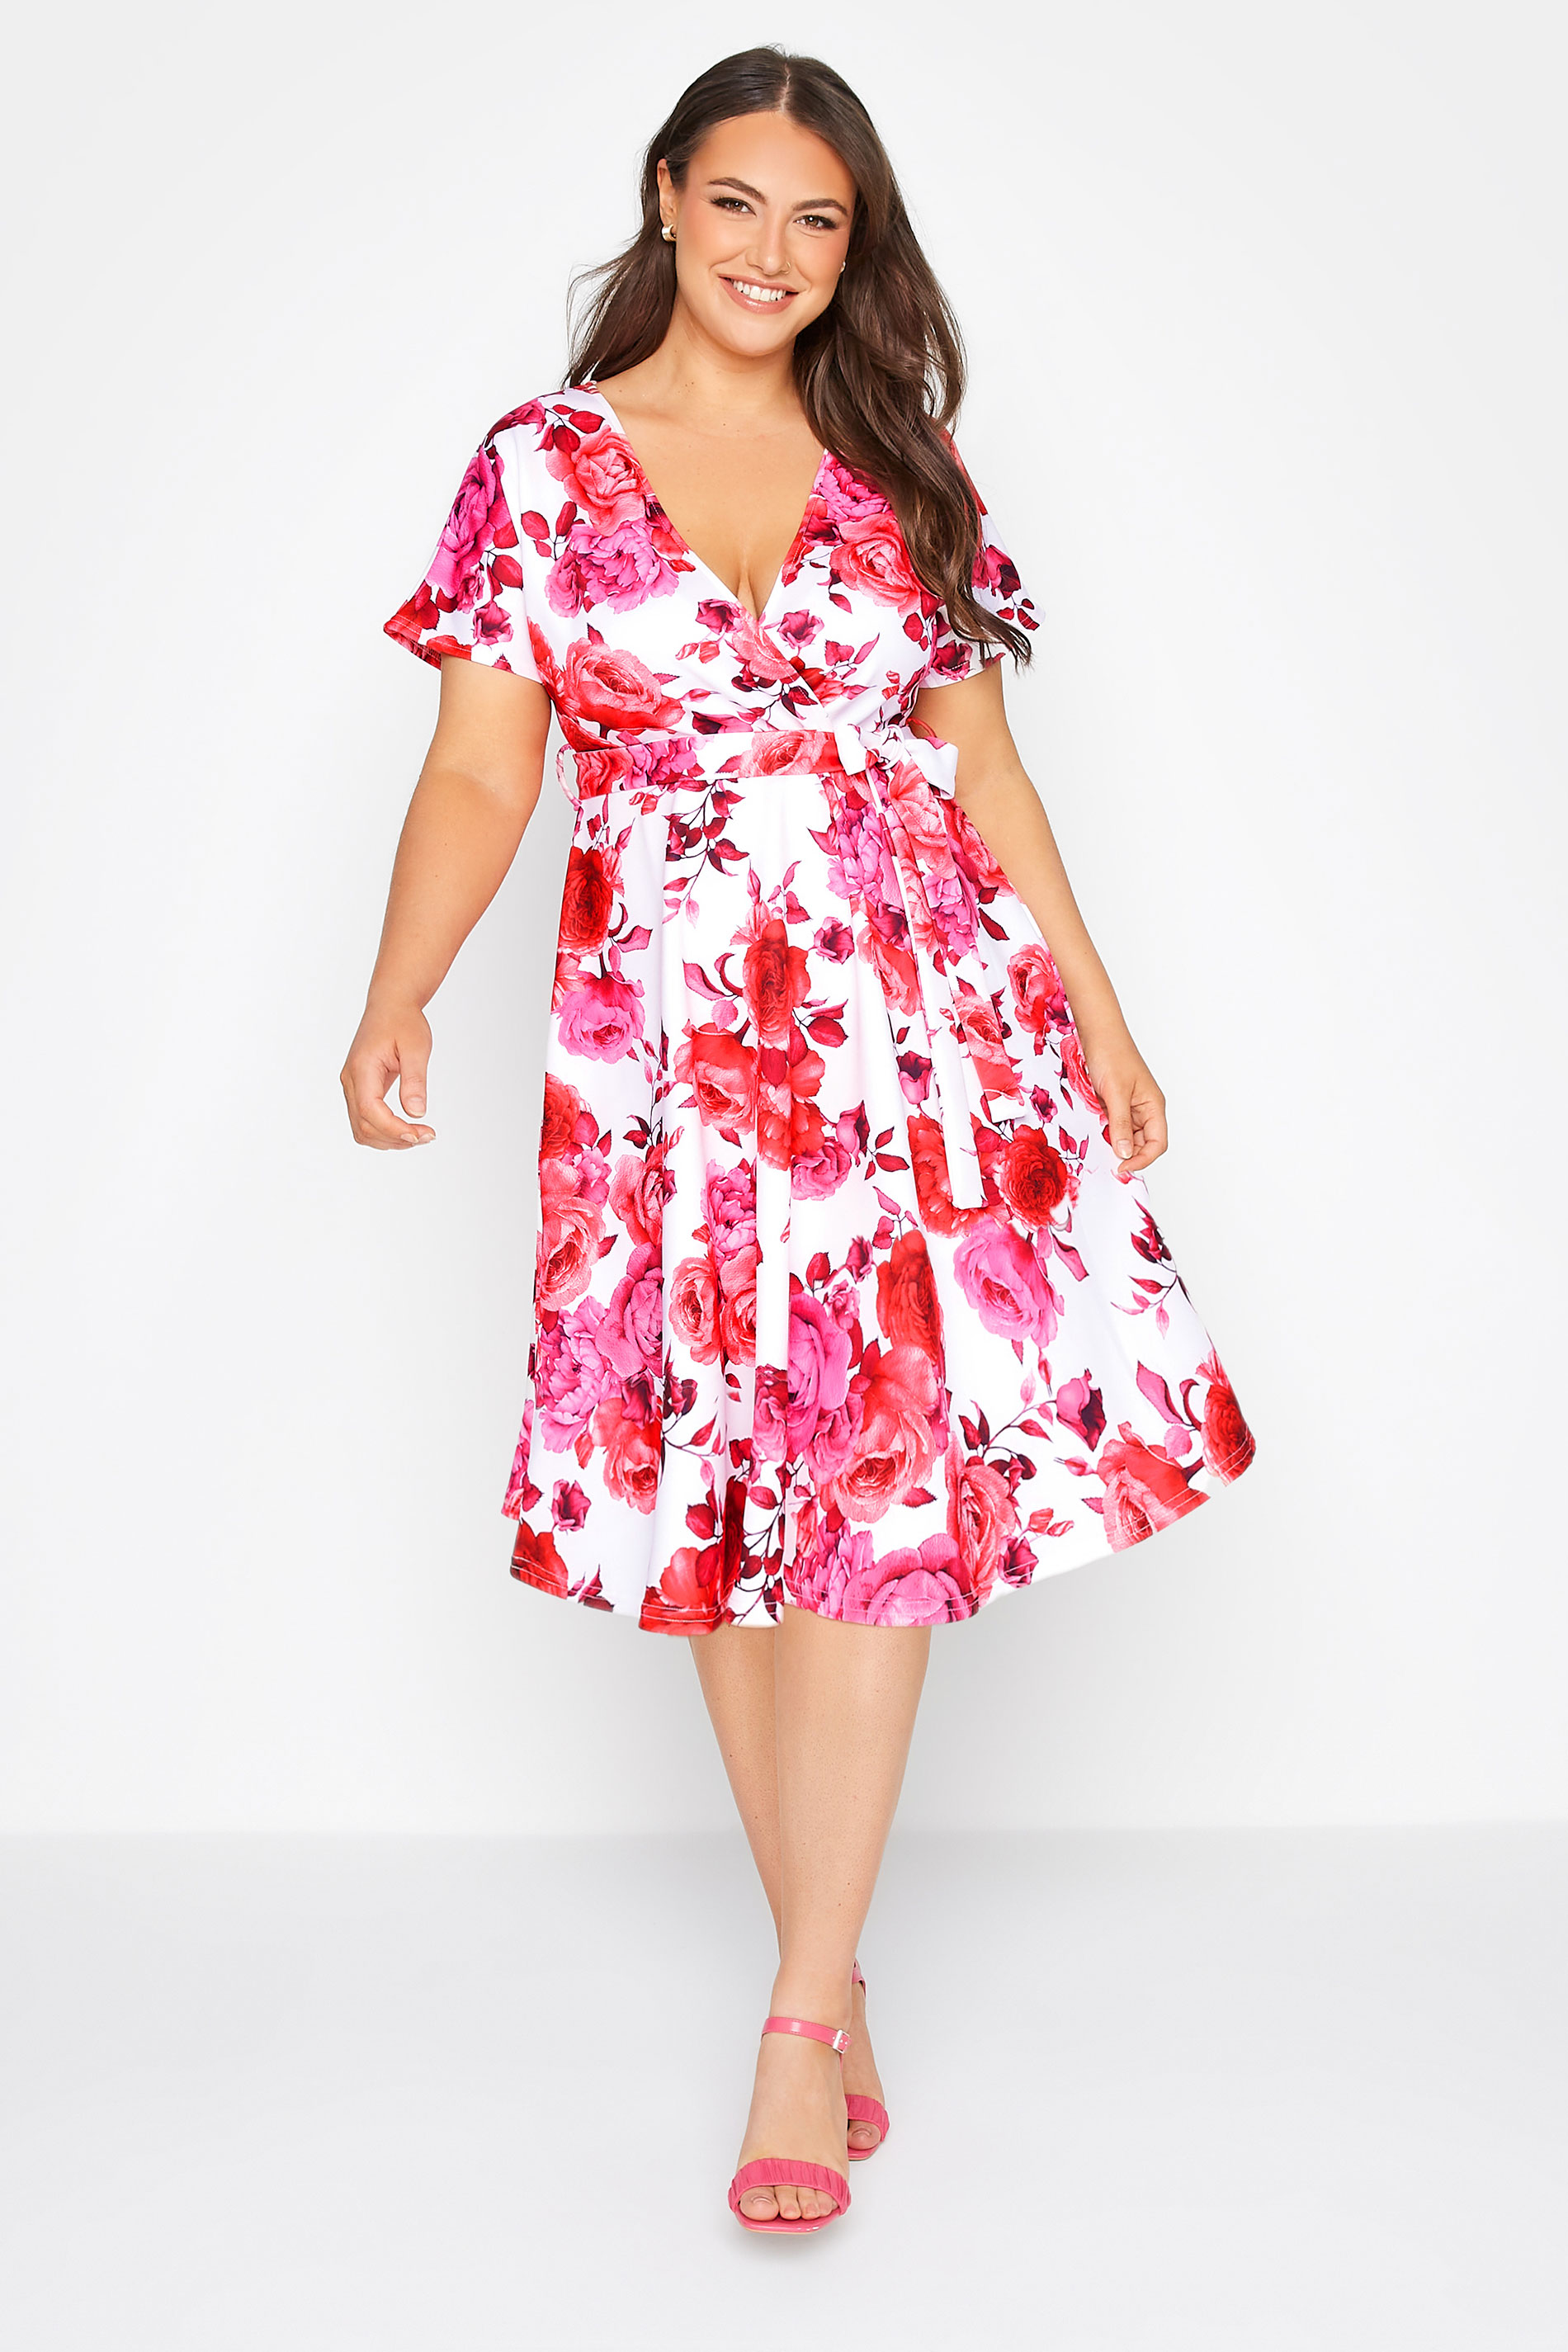 Robes Grande Taille Grande taille  Robes Patineuses | YOURS LONDON - Robe Blanche Floral Rose en Cache-Coeur - OS84597